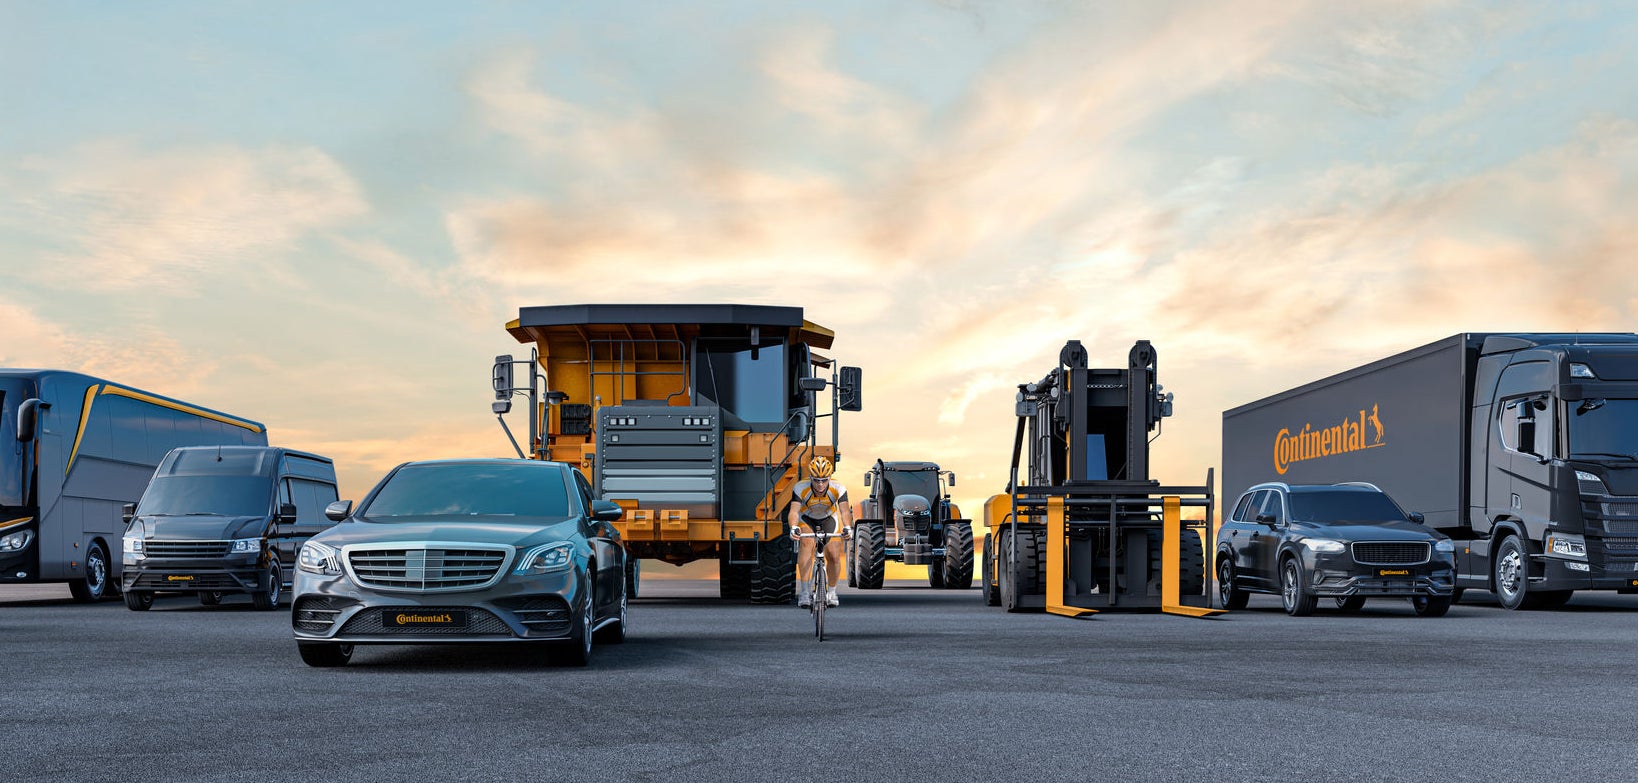 Continental offers tires for a wide range of vehicle types.